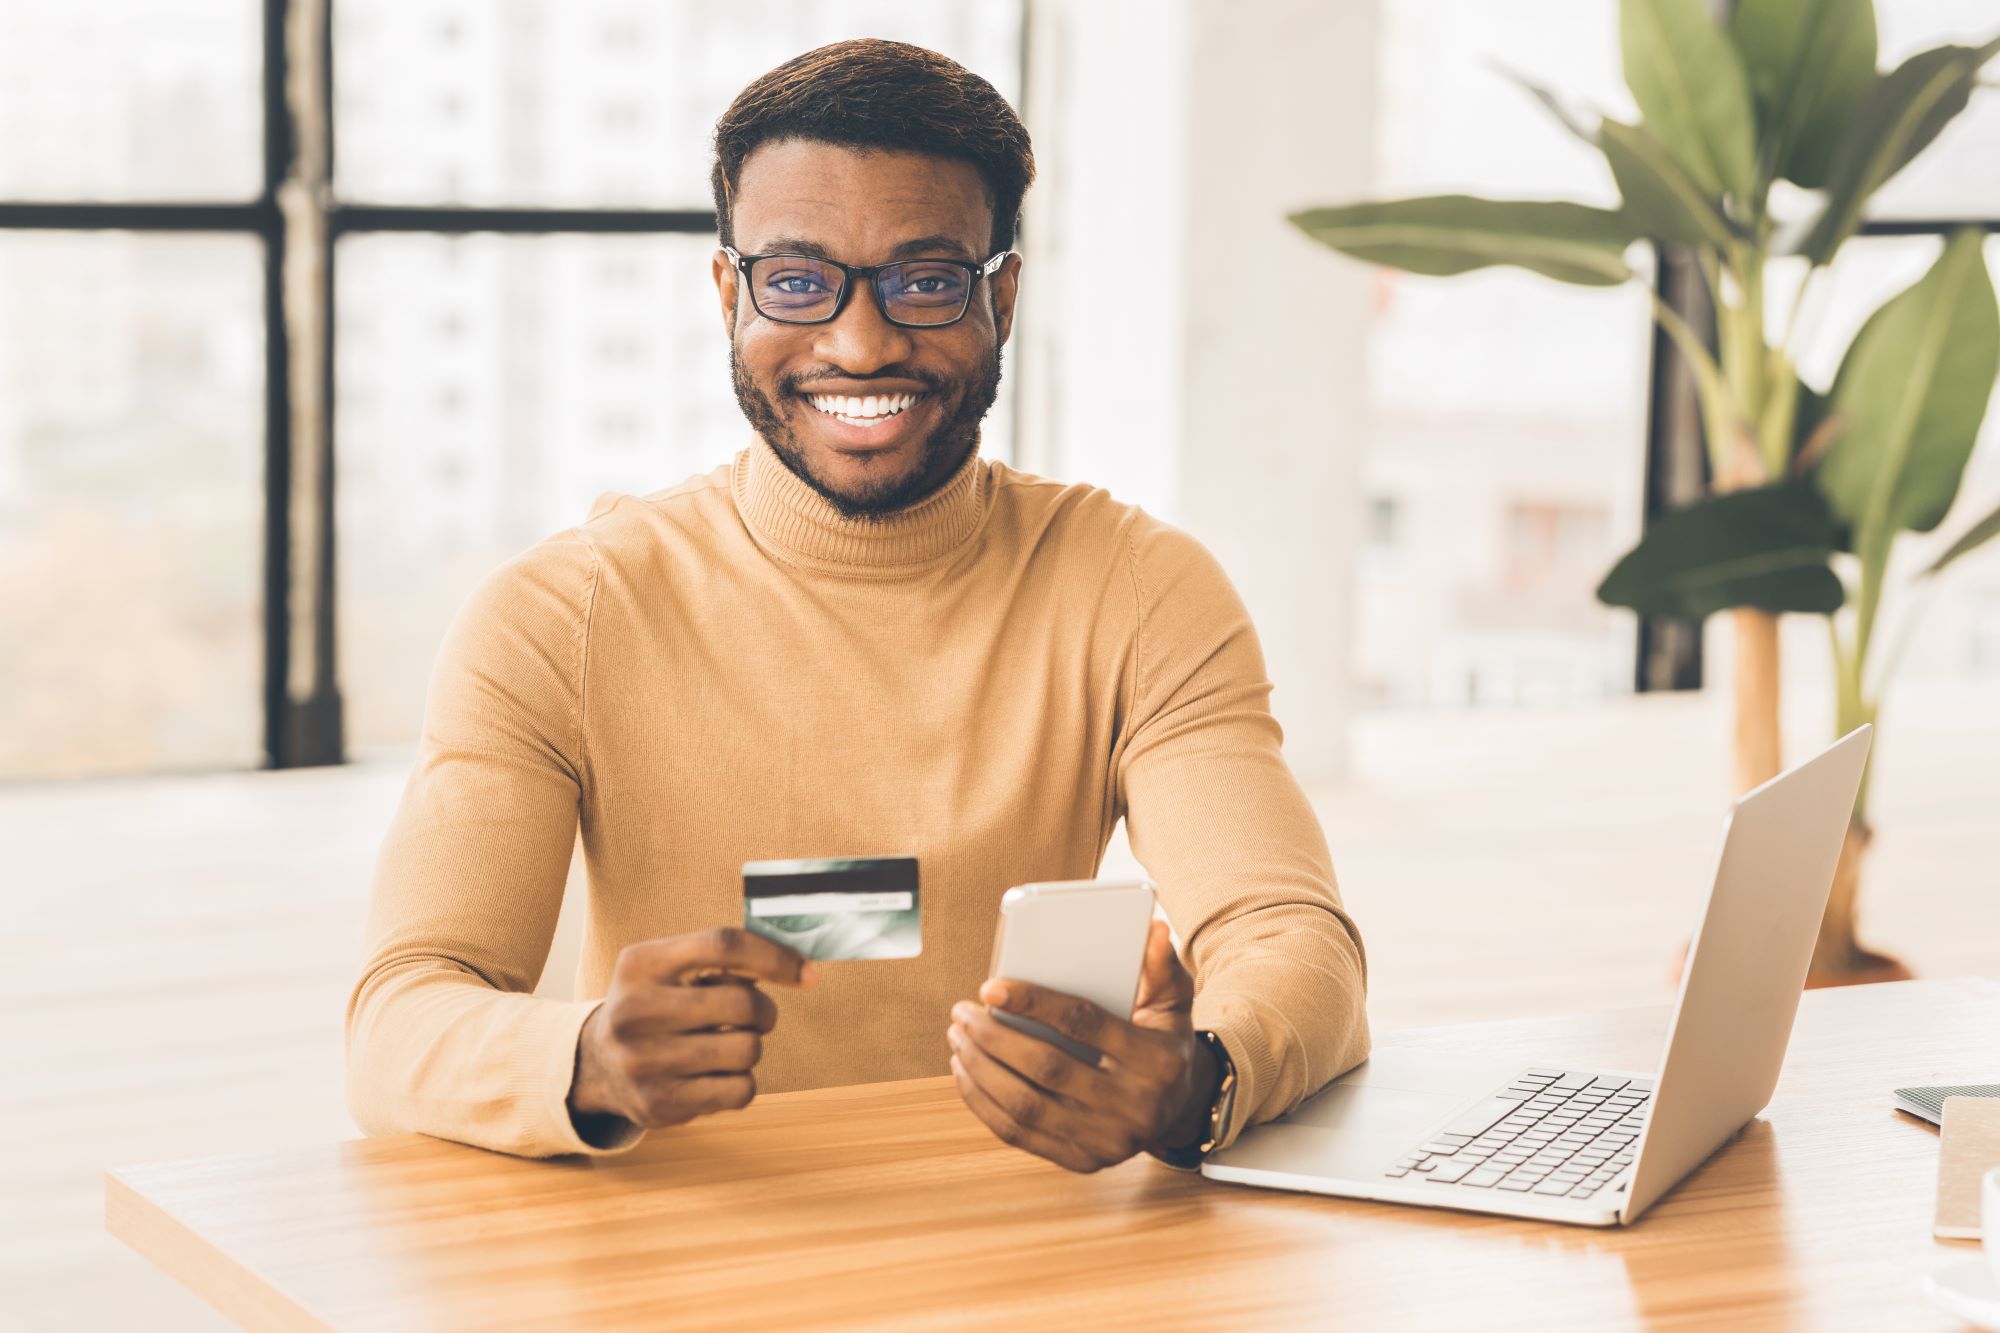 A young man smiling, holding smart phone and credit card trying internet banking